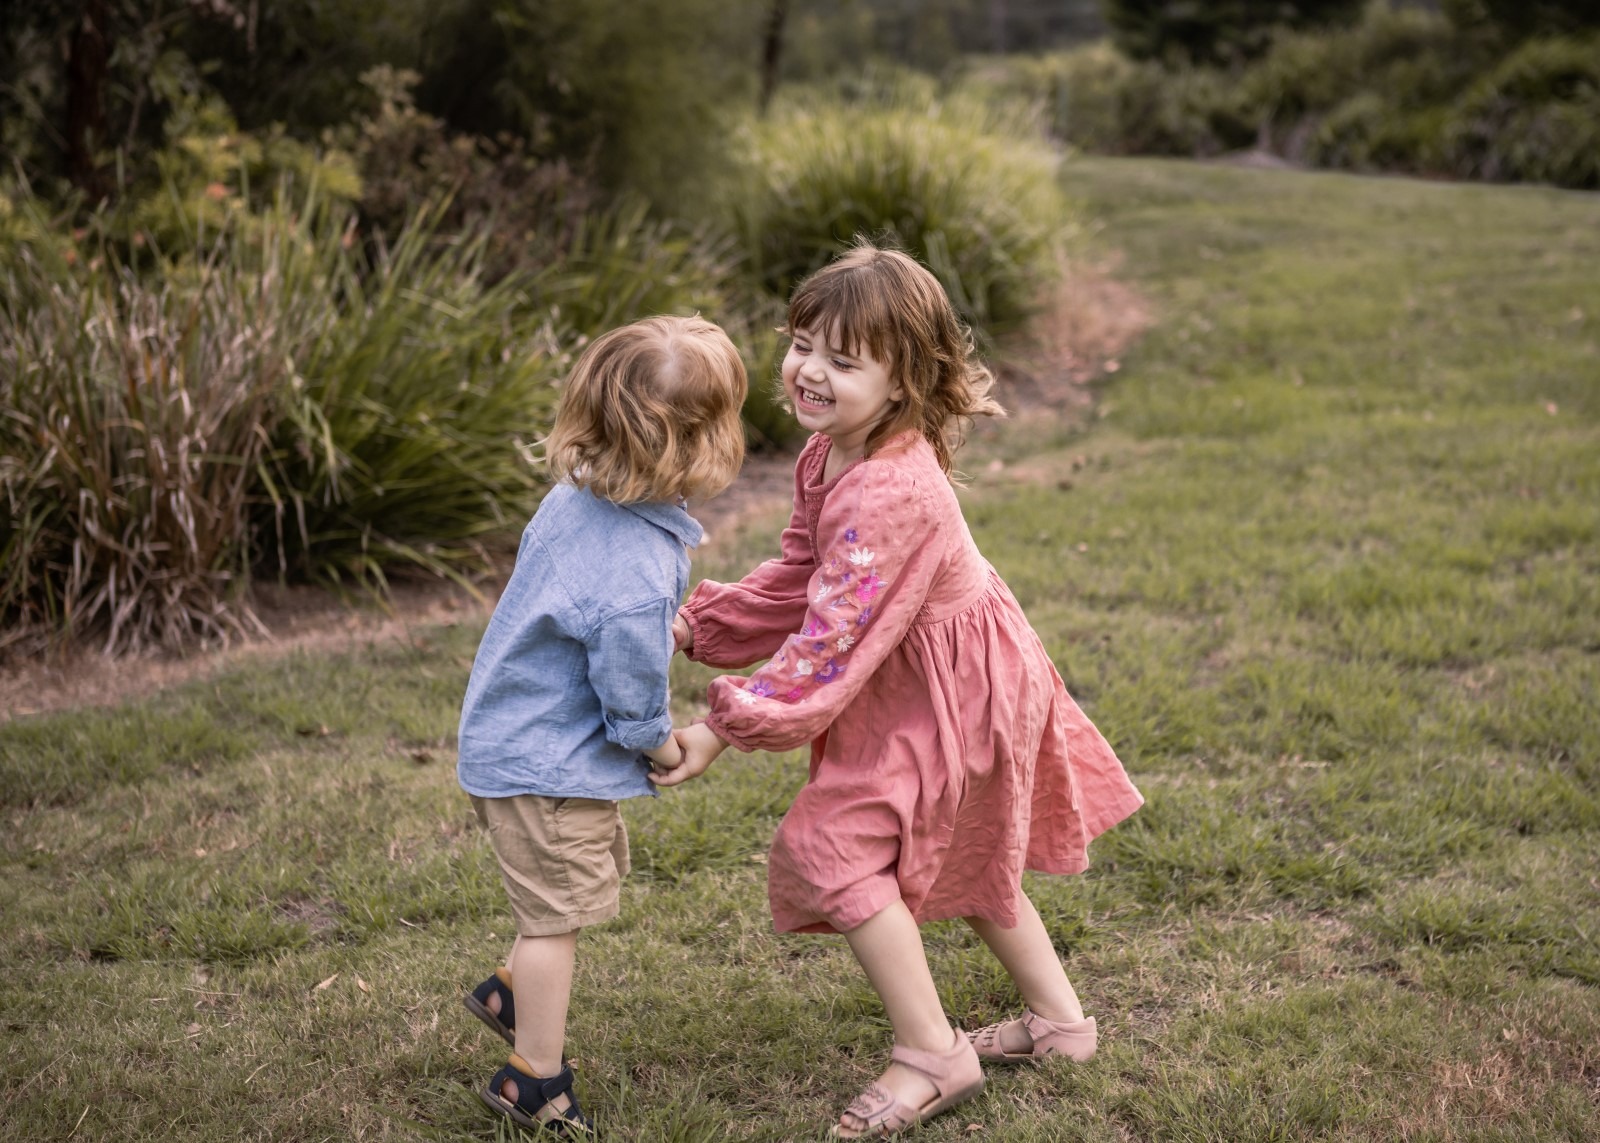 Little brother and sister dancing and playing together in the park in Ipswich